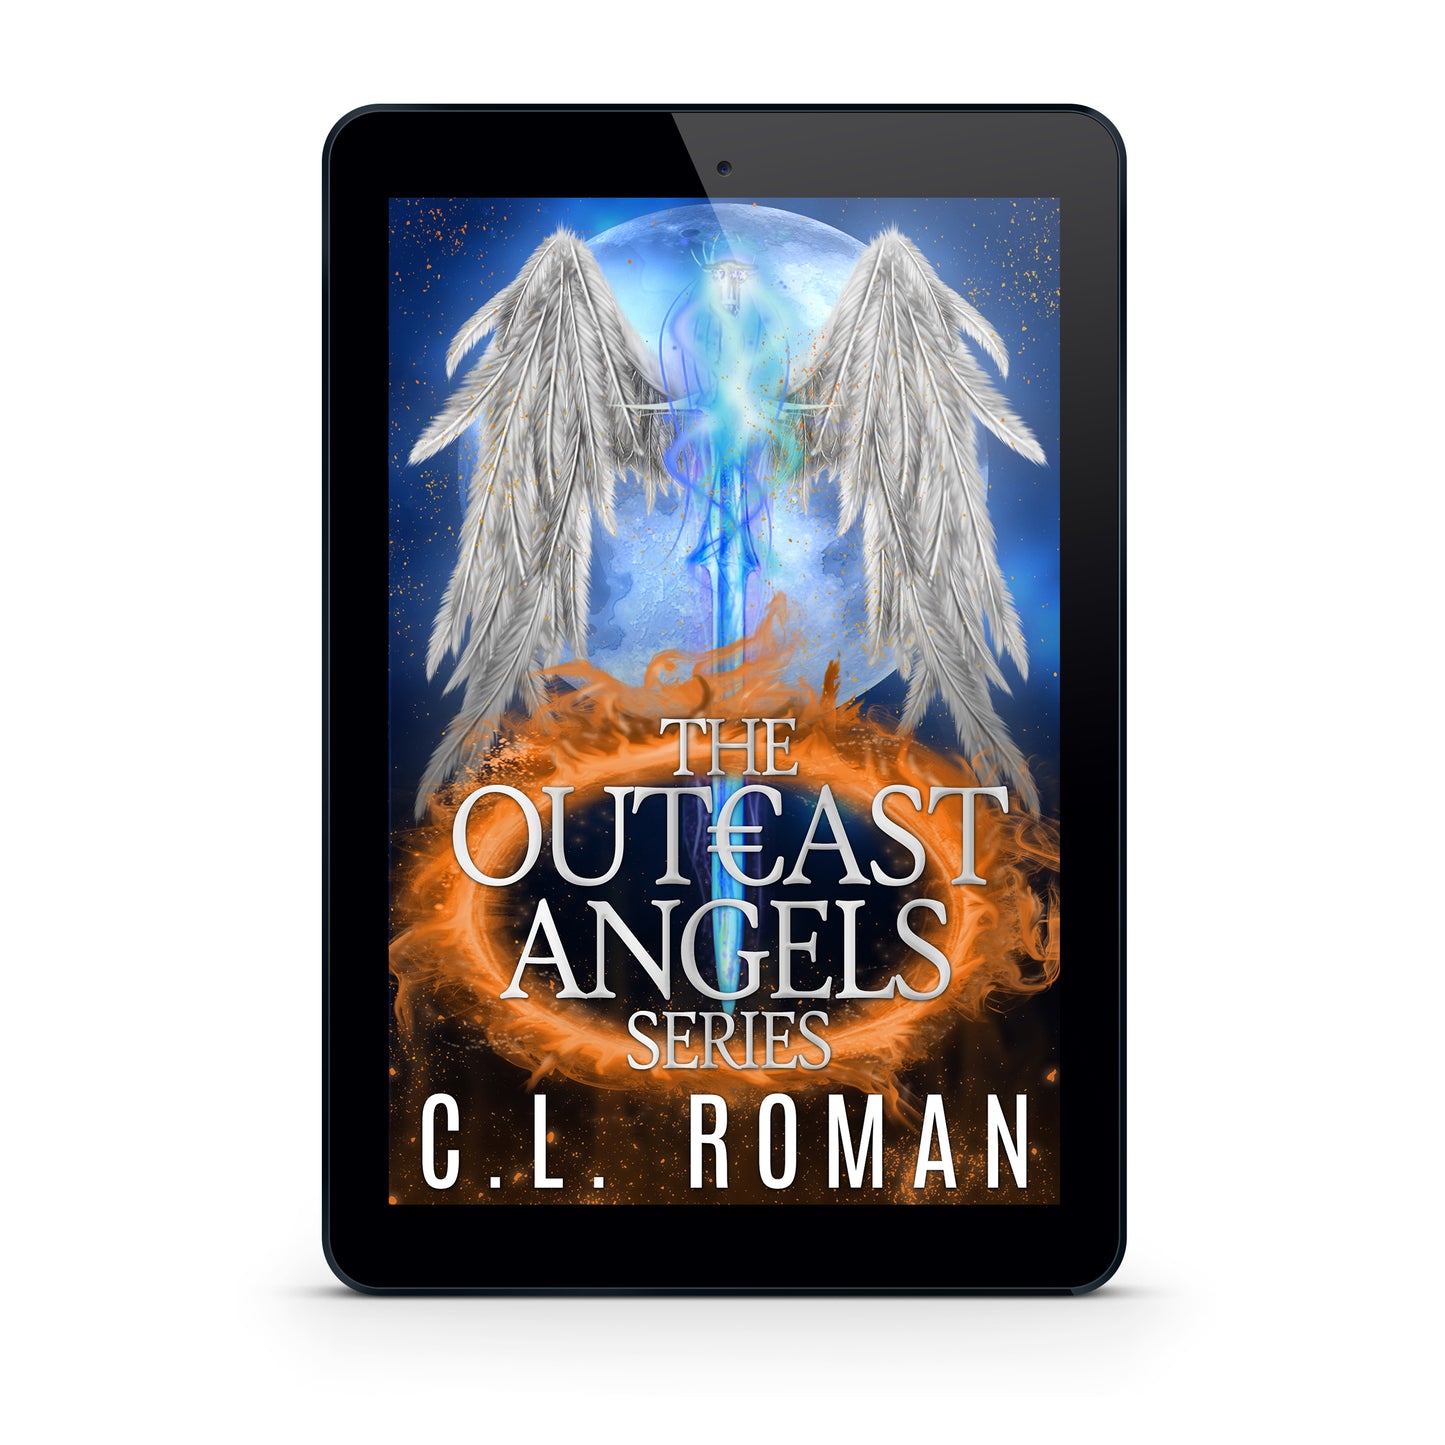 The Outcast Angels Collection: Books 1-4 (e-books)